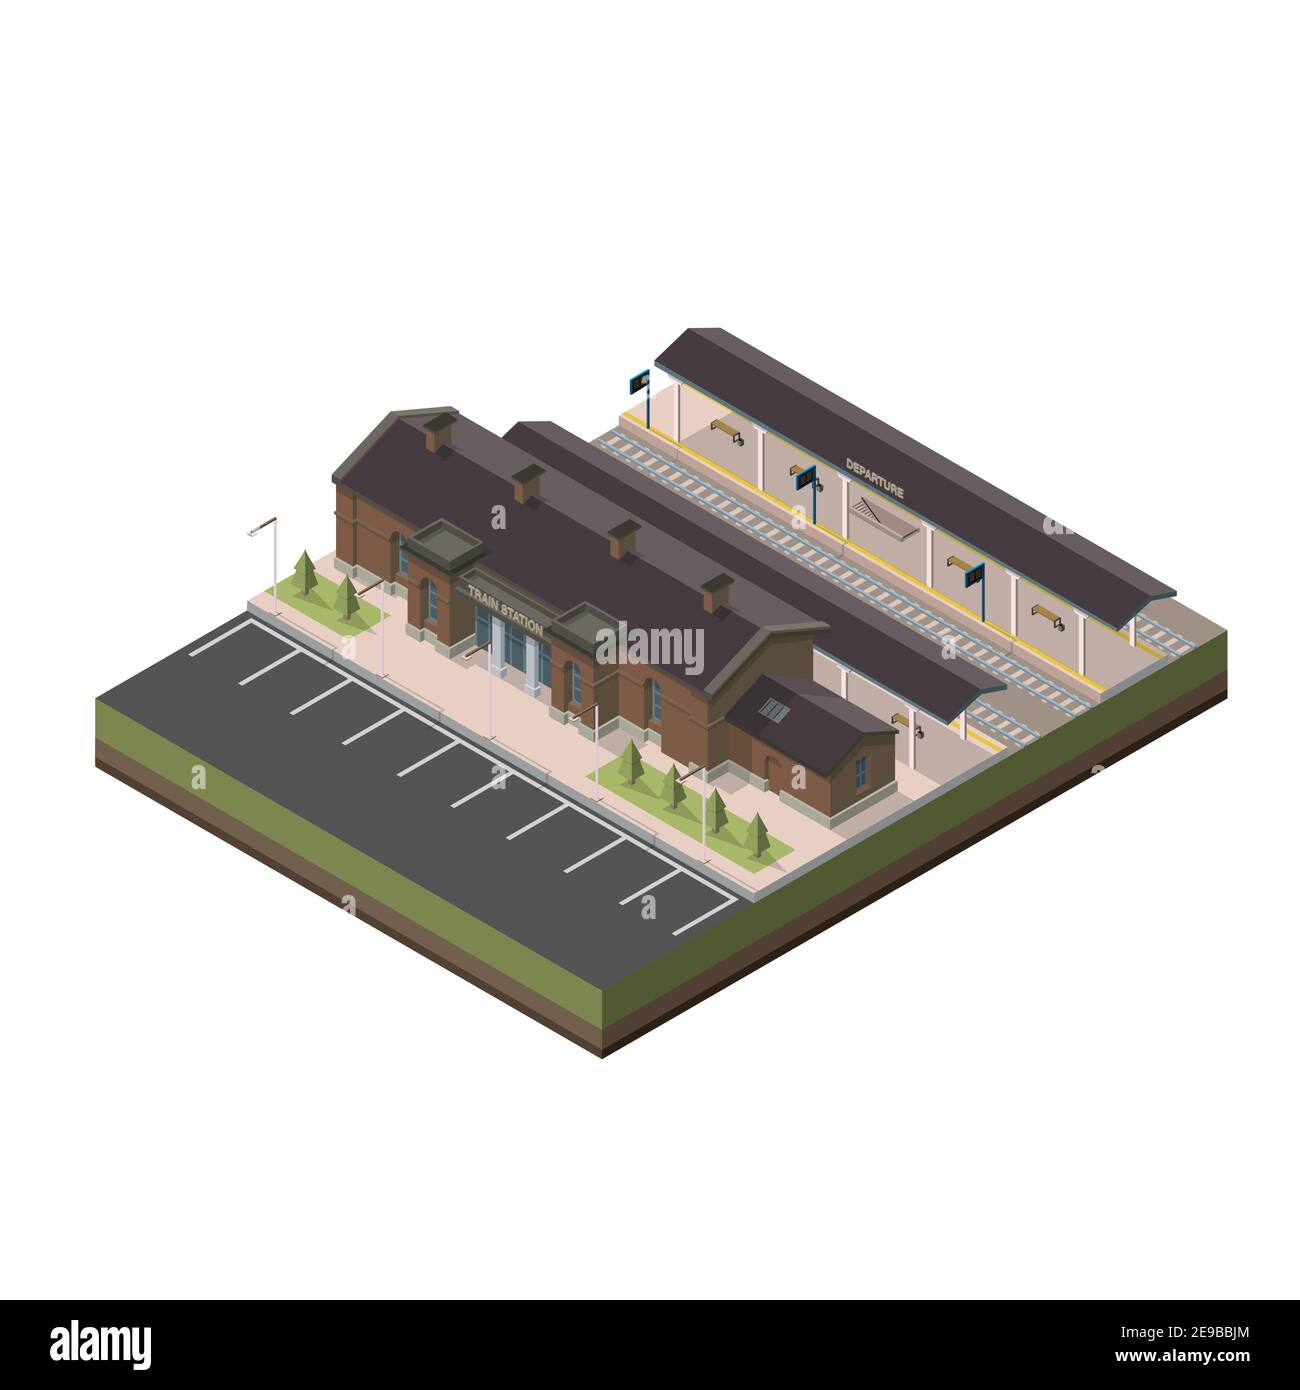 Railway station isometric. Vector isometric element representing railway(train) station with parking and passenger platform. Stock Vector